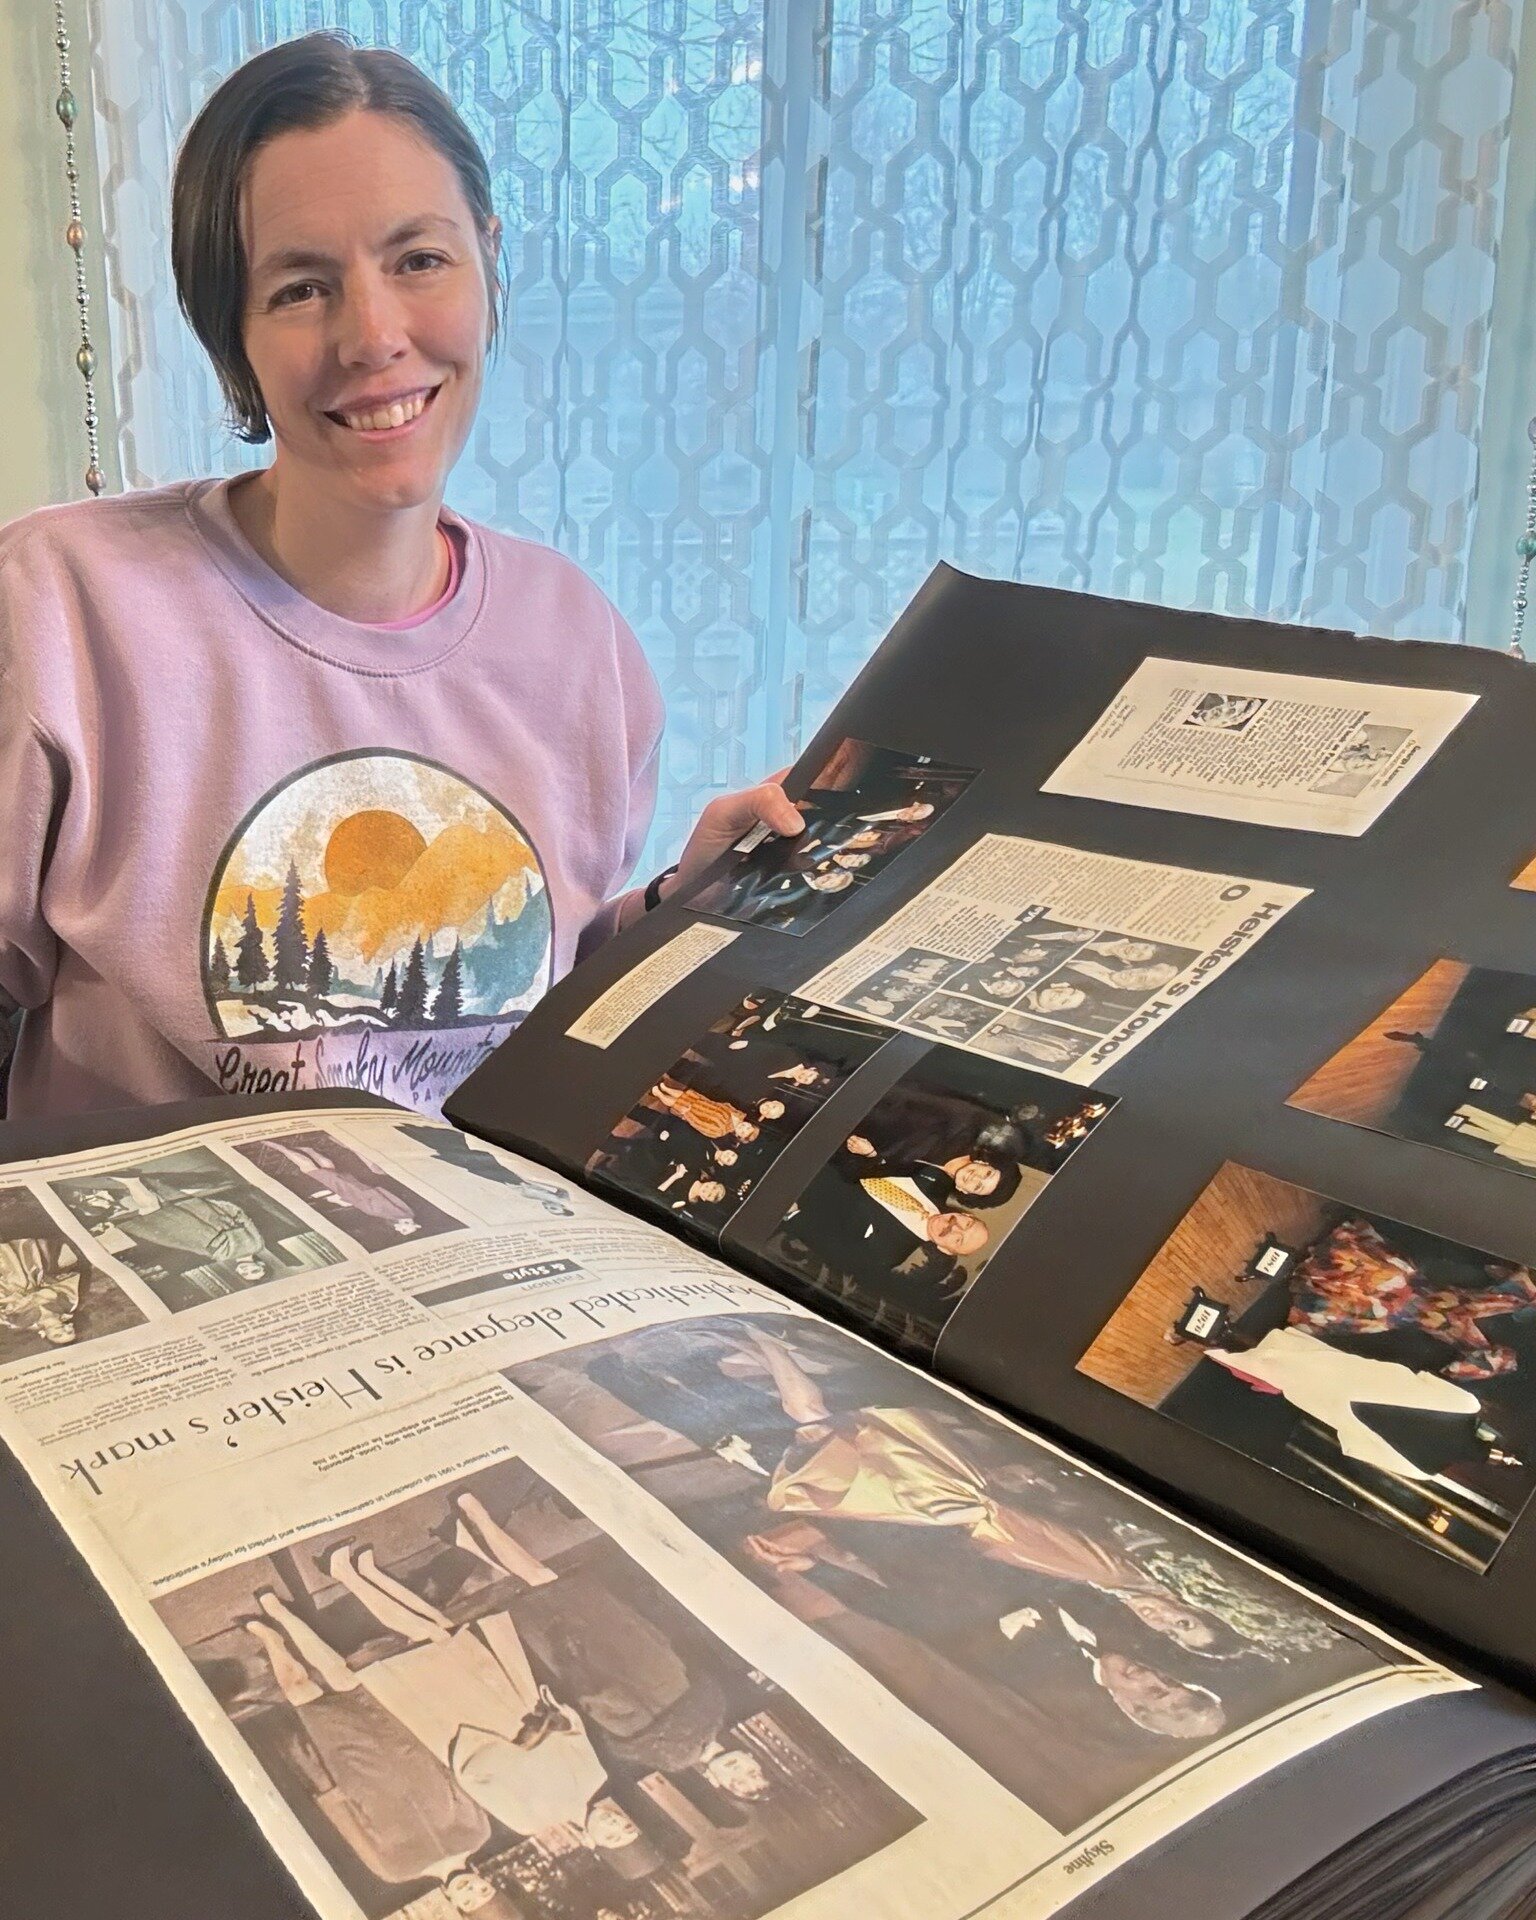 🌟 New Blog Post Alert! 🌟 Dive into Chicago's rich fashion history with me as I digitize memories, stories, and more! From scrapbooks to digital archives, join me on this journey of discovery. Share your own fashion memories and stories with me - I'